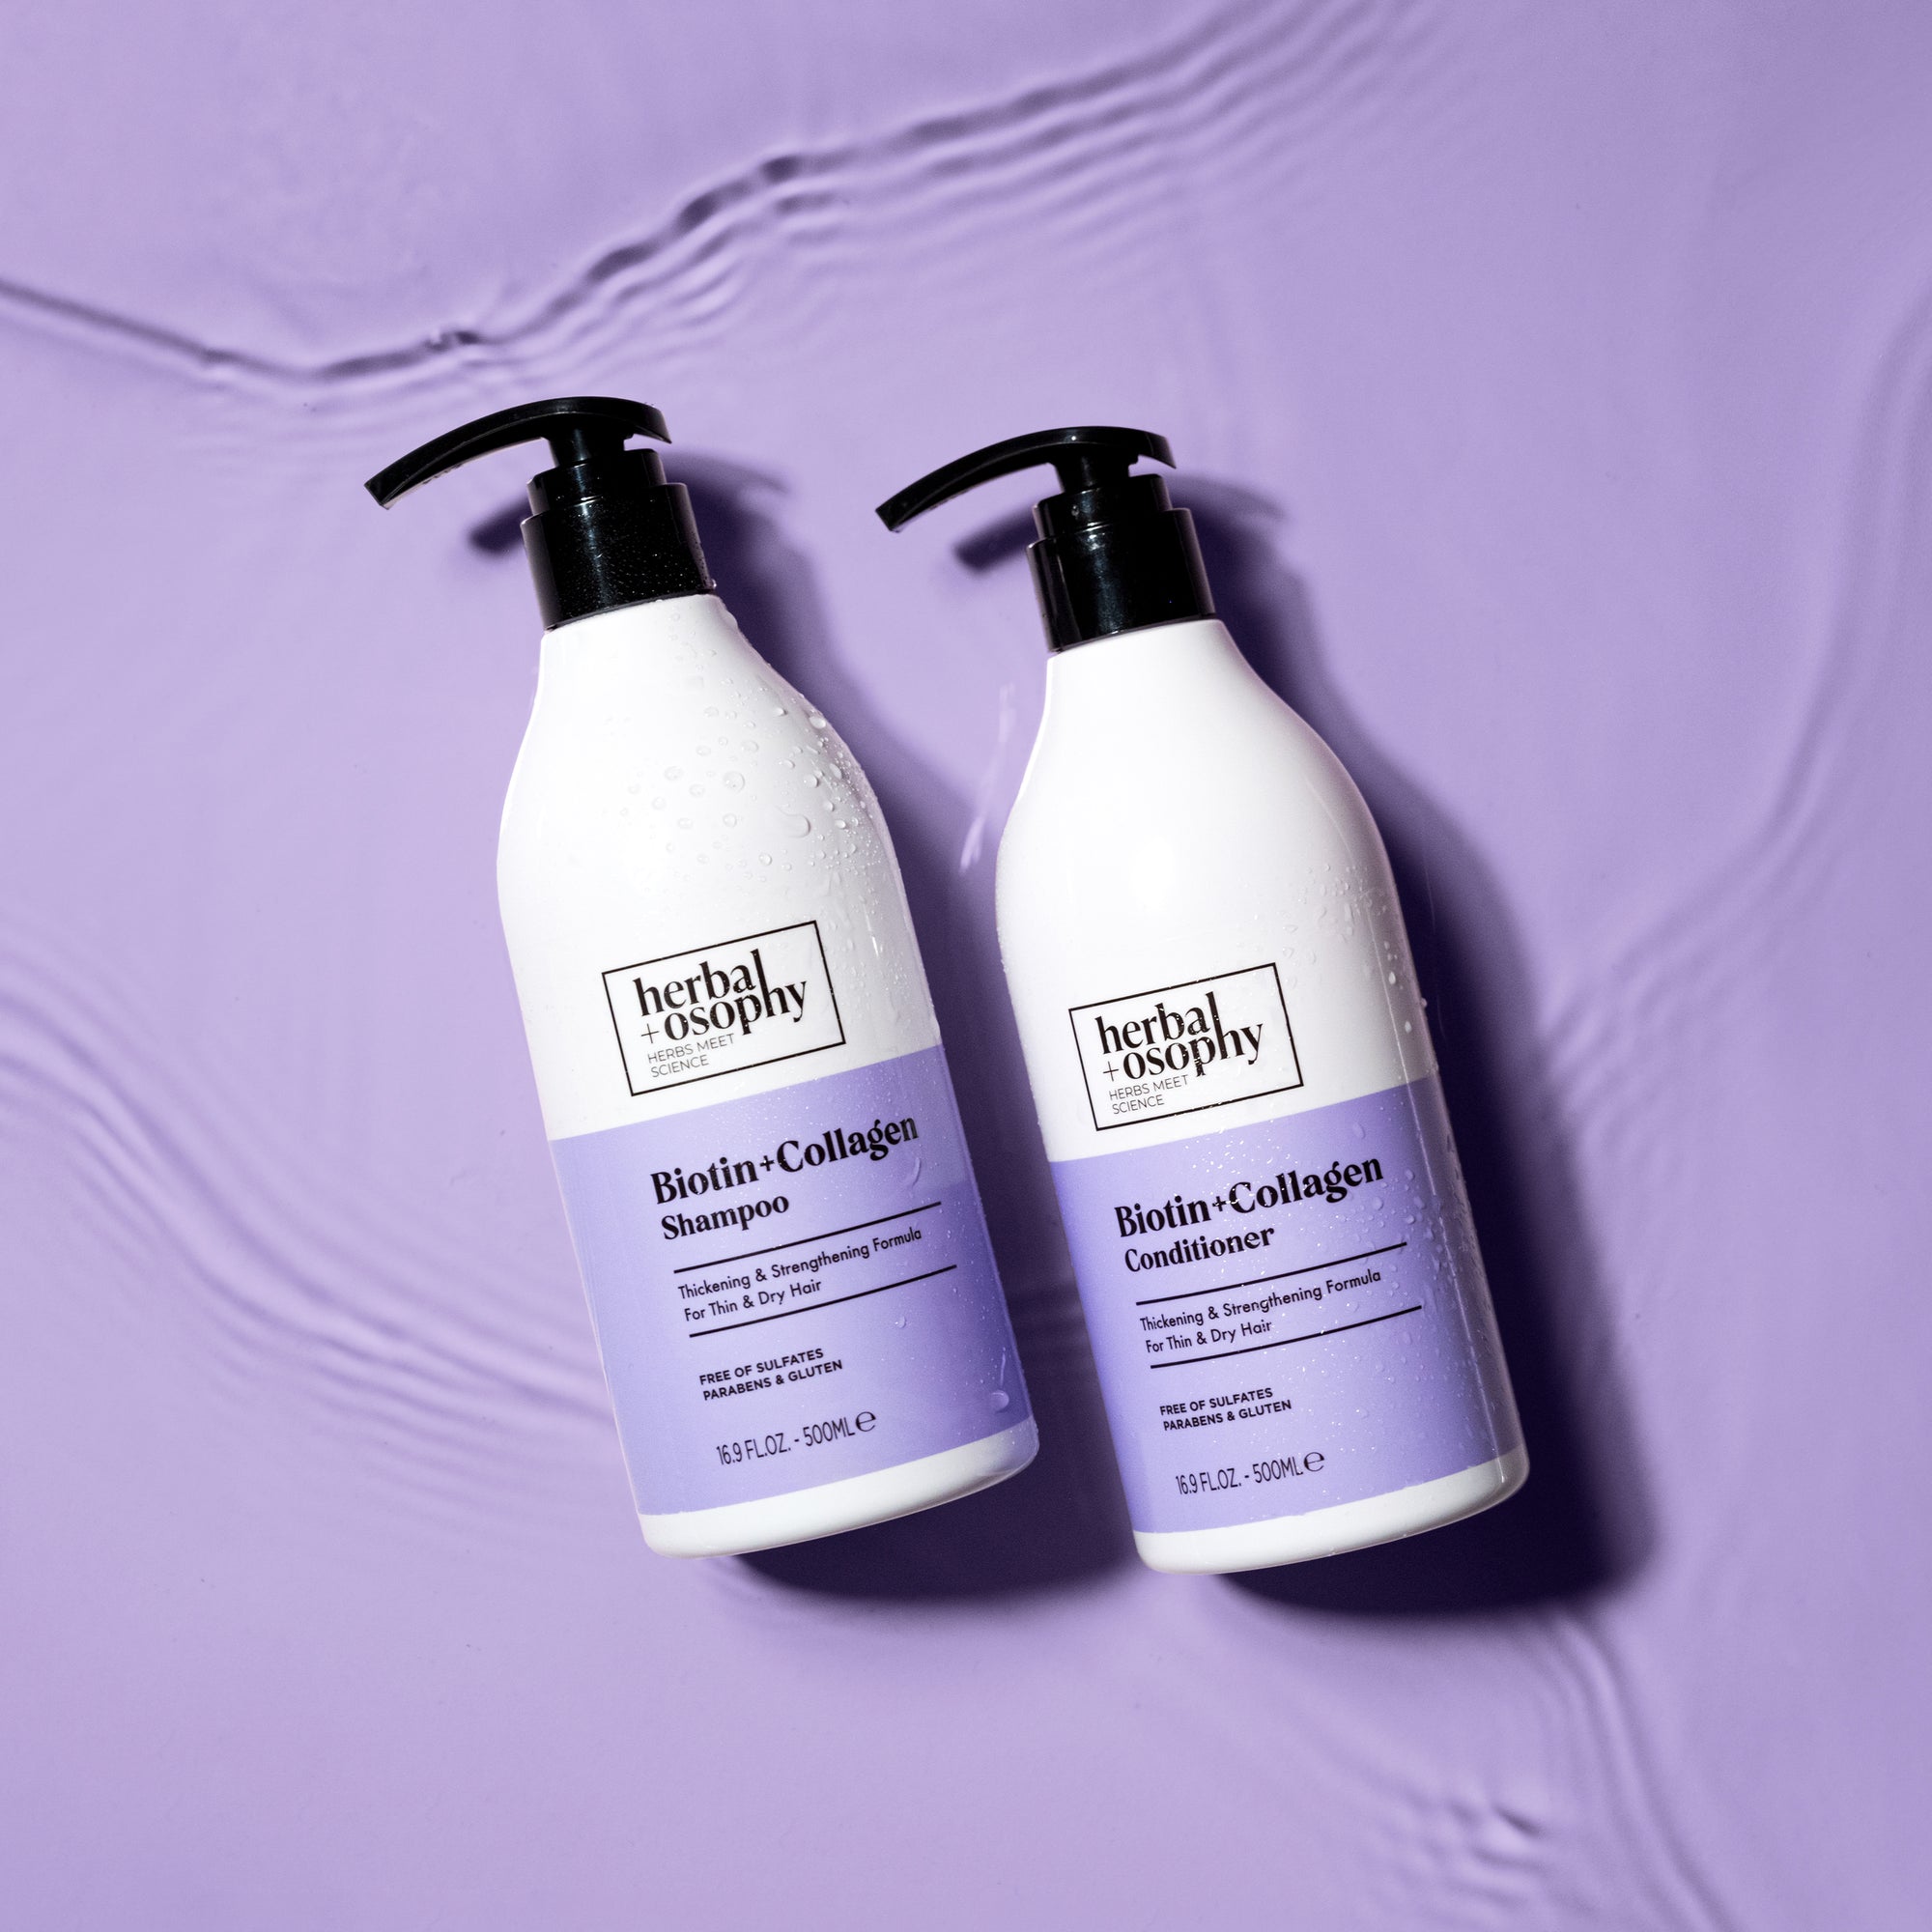 Biotin + Collagen Shampoo and Conditioner on purple background in rippling water